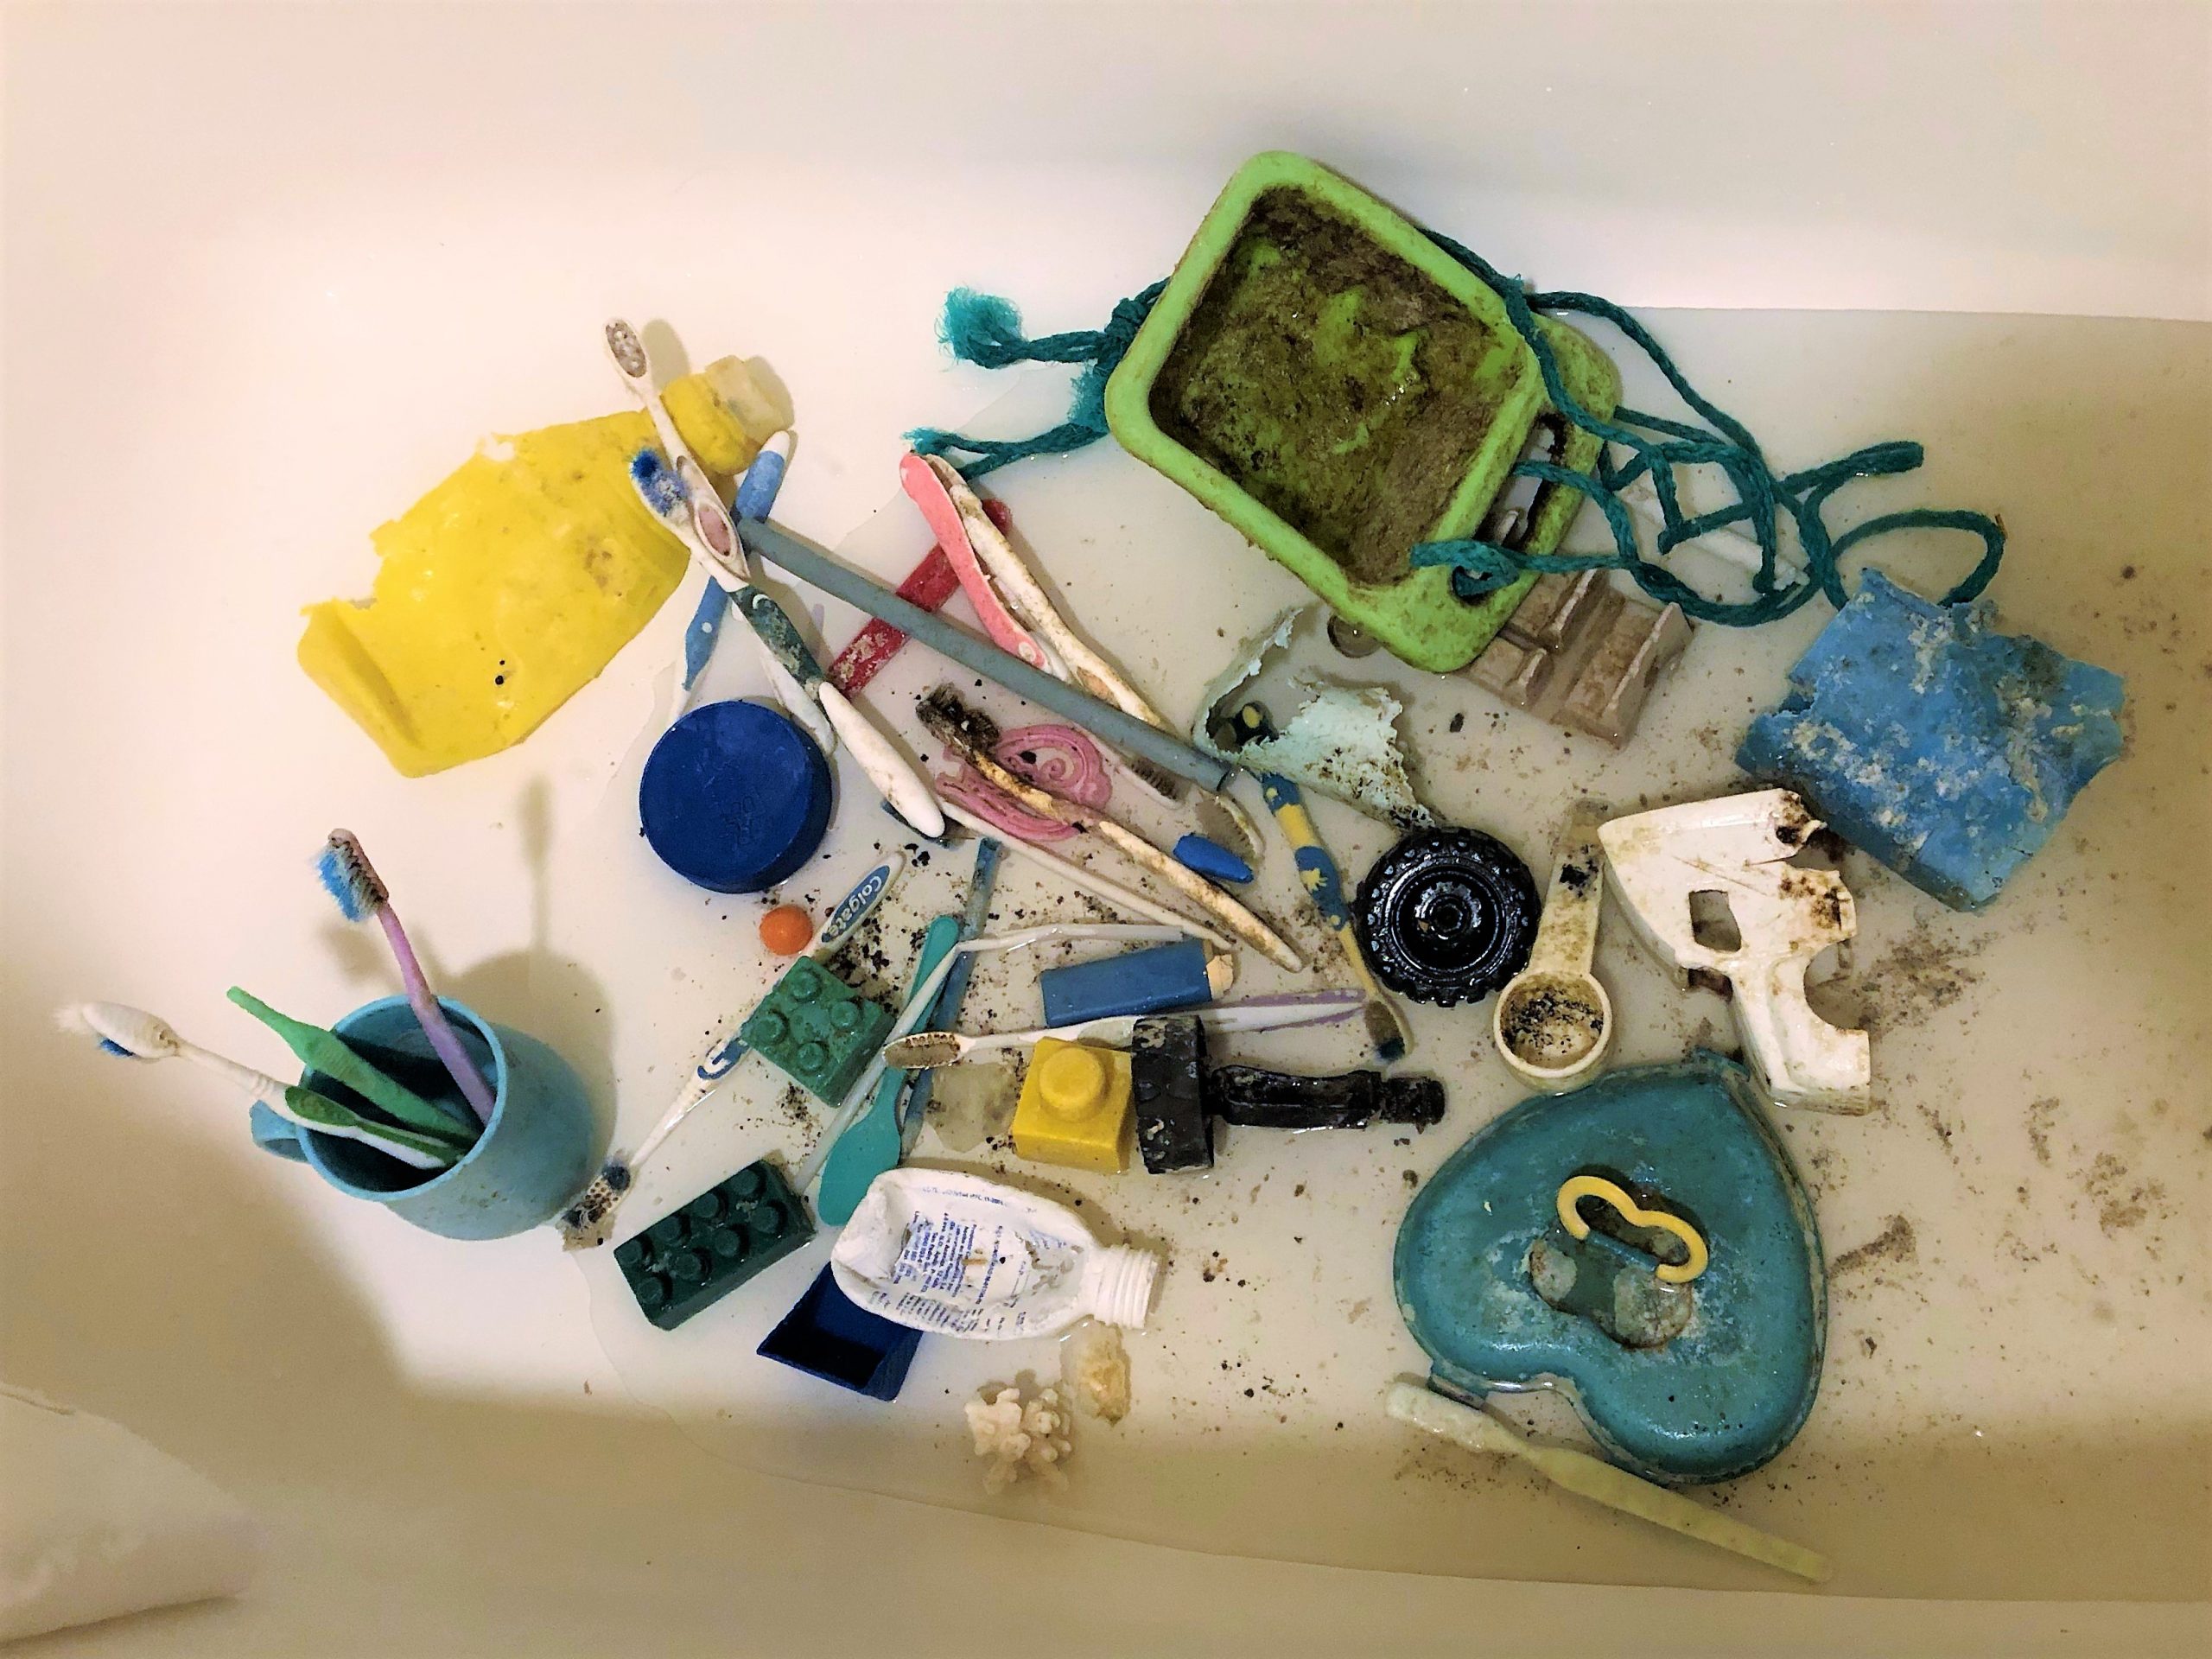 Plastic marine debris pieces, including toothbrushes and toys, that were found during our visit. 